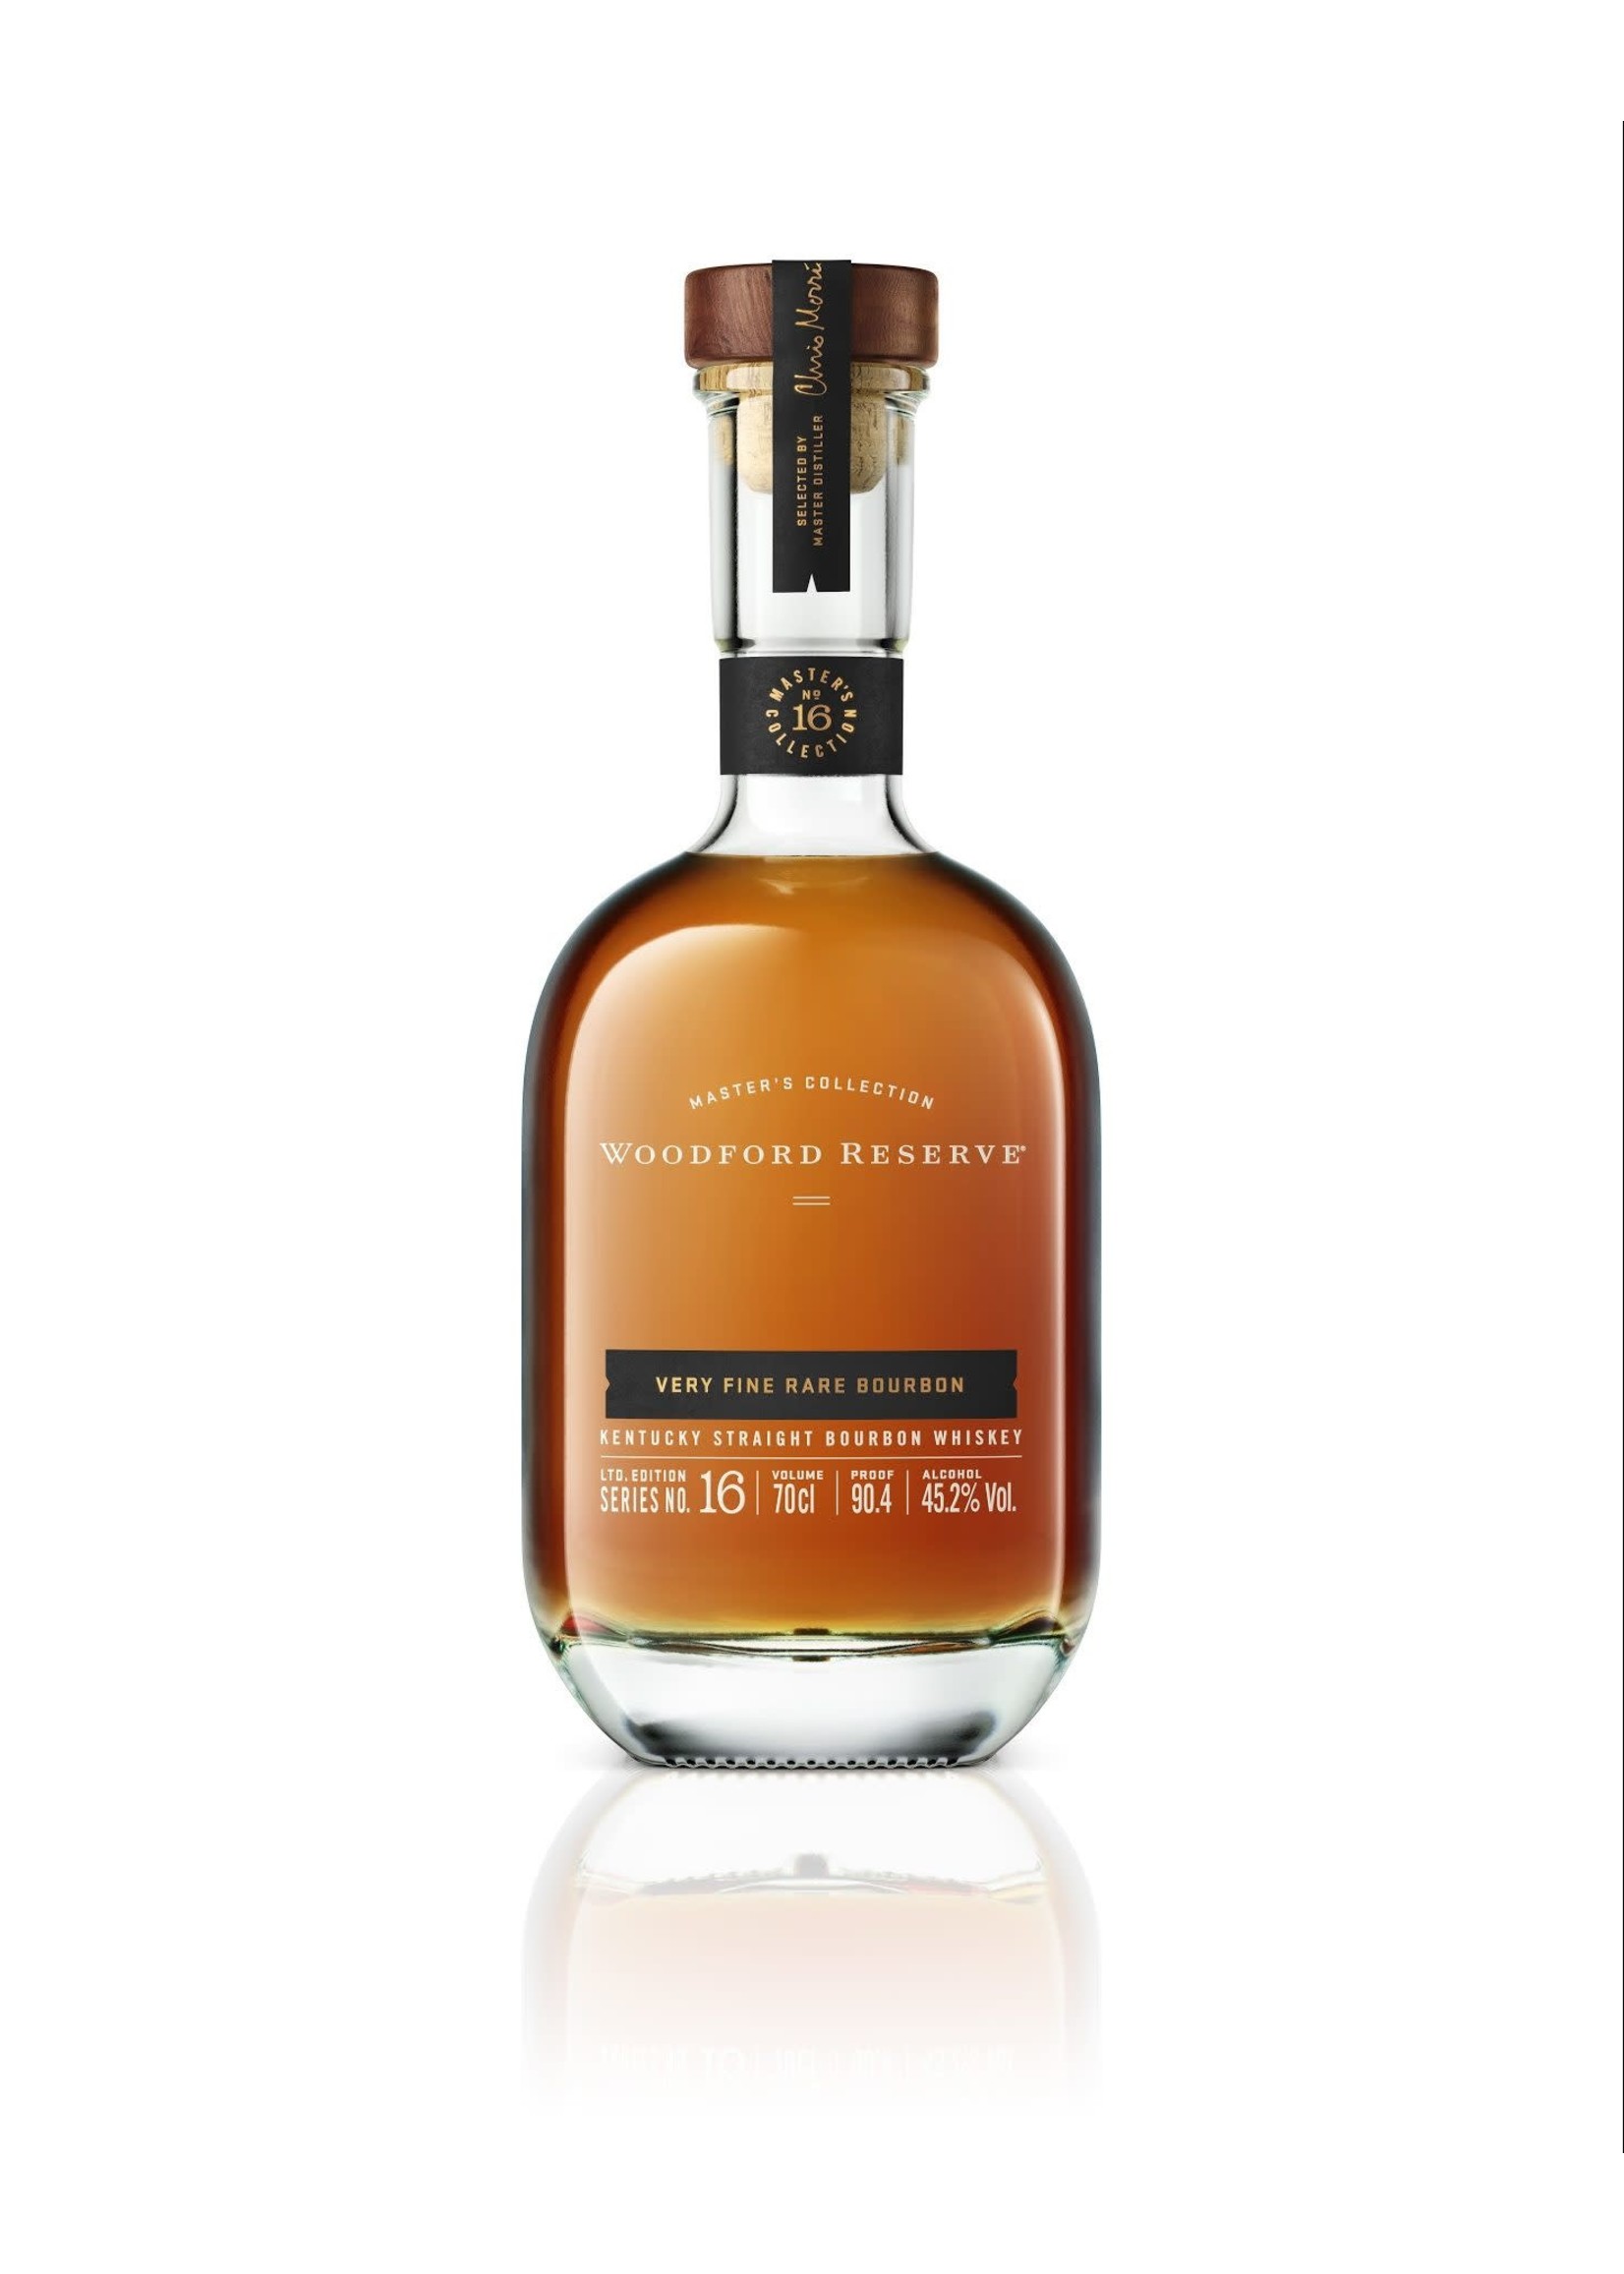 WOODFORD RESERVE WOODFORD RESERVE	MASTERS COLLECTION	.750L